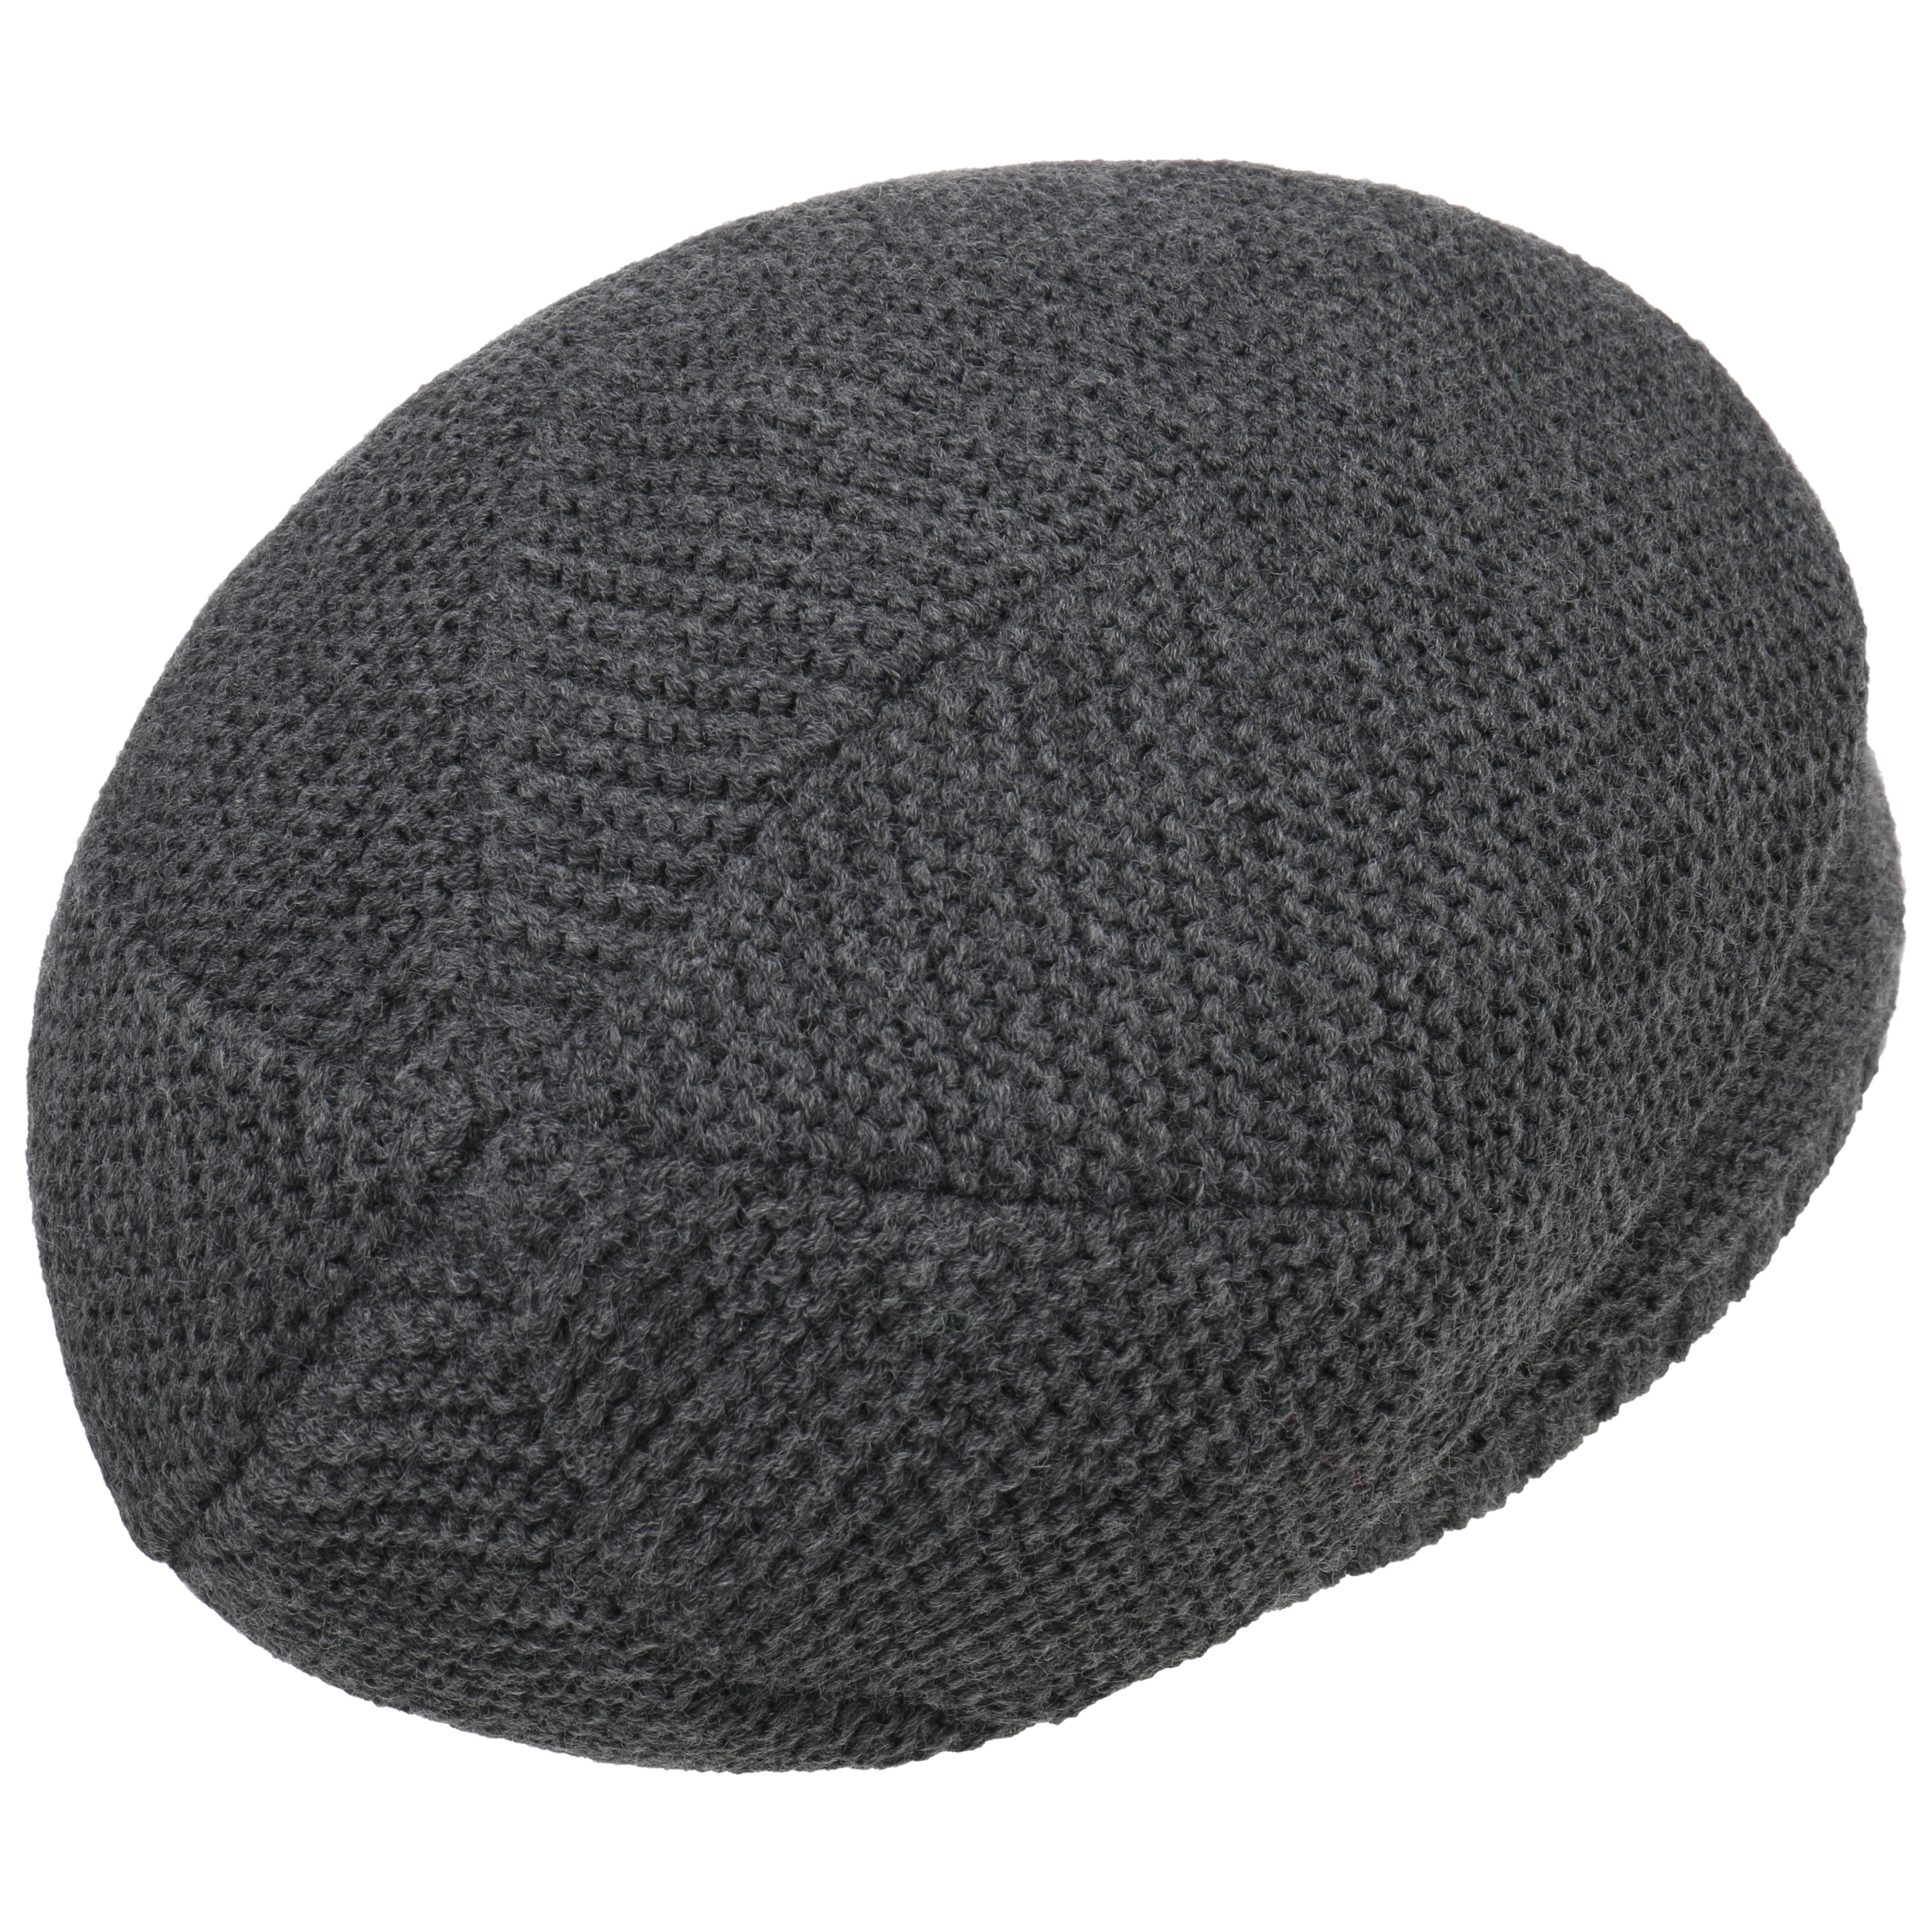 37,95 Hat Keith by Chillouts - Beanie €